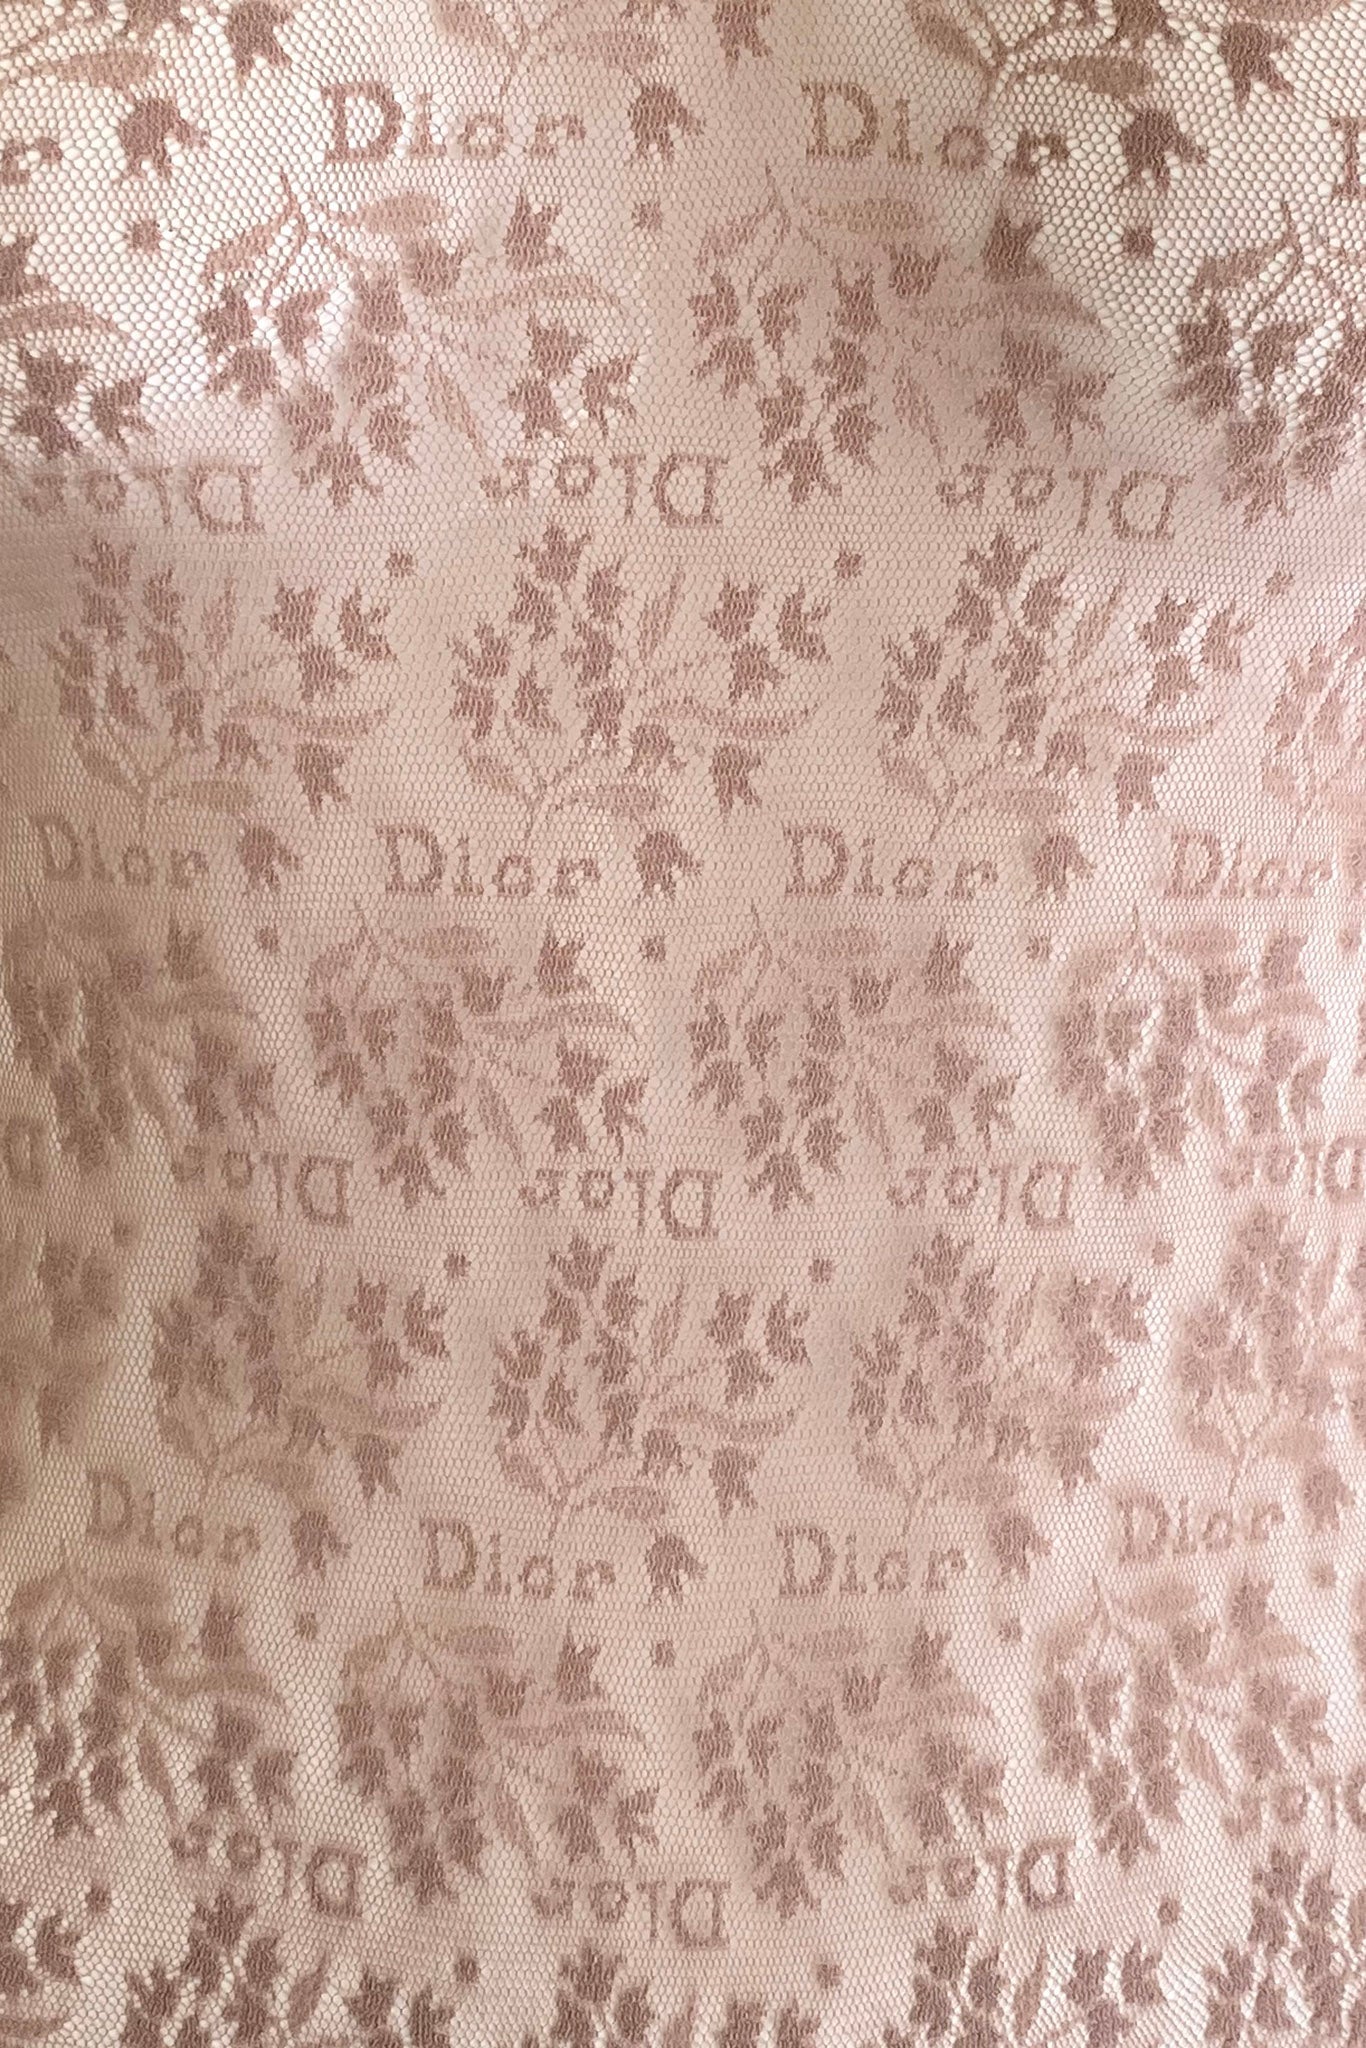 Vintage Christian Dior Deadstock Sheer Lace Logo Bodysuit fabric detail at Recess Los Angeles